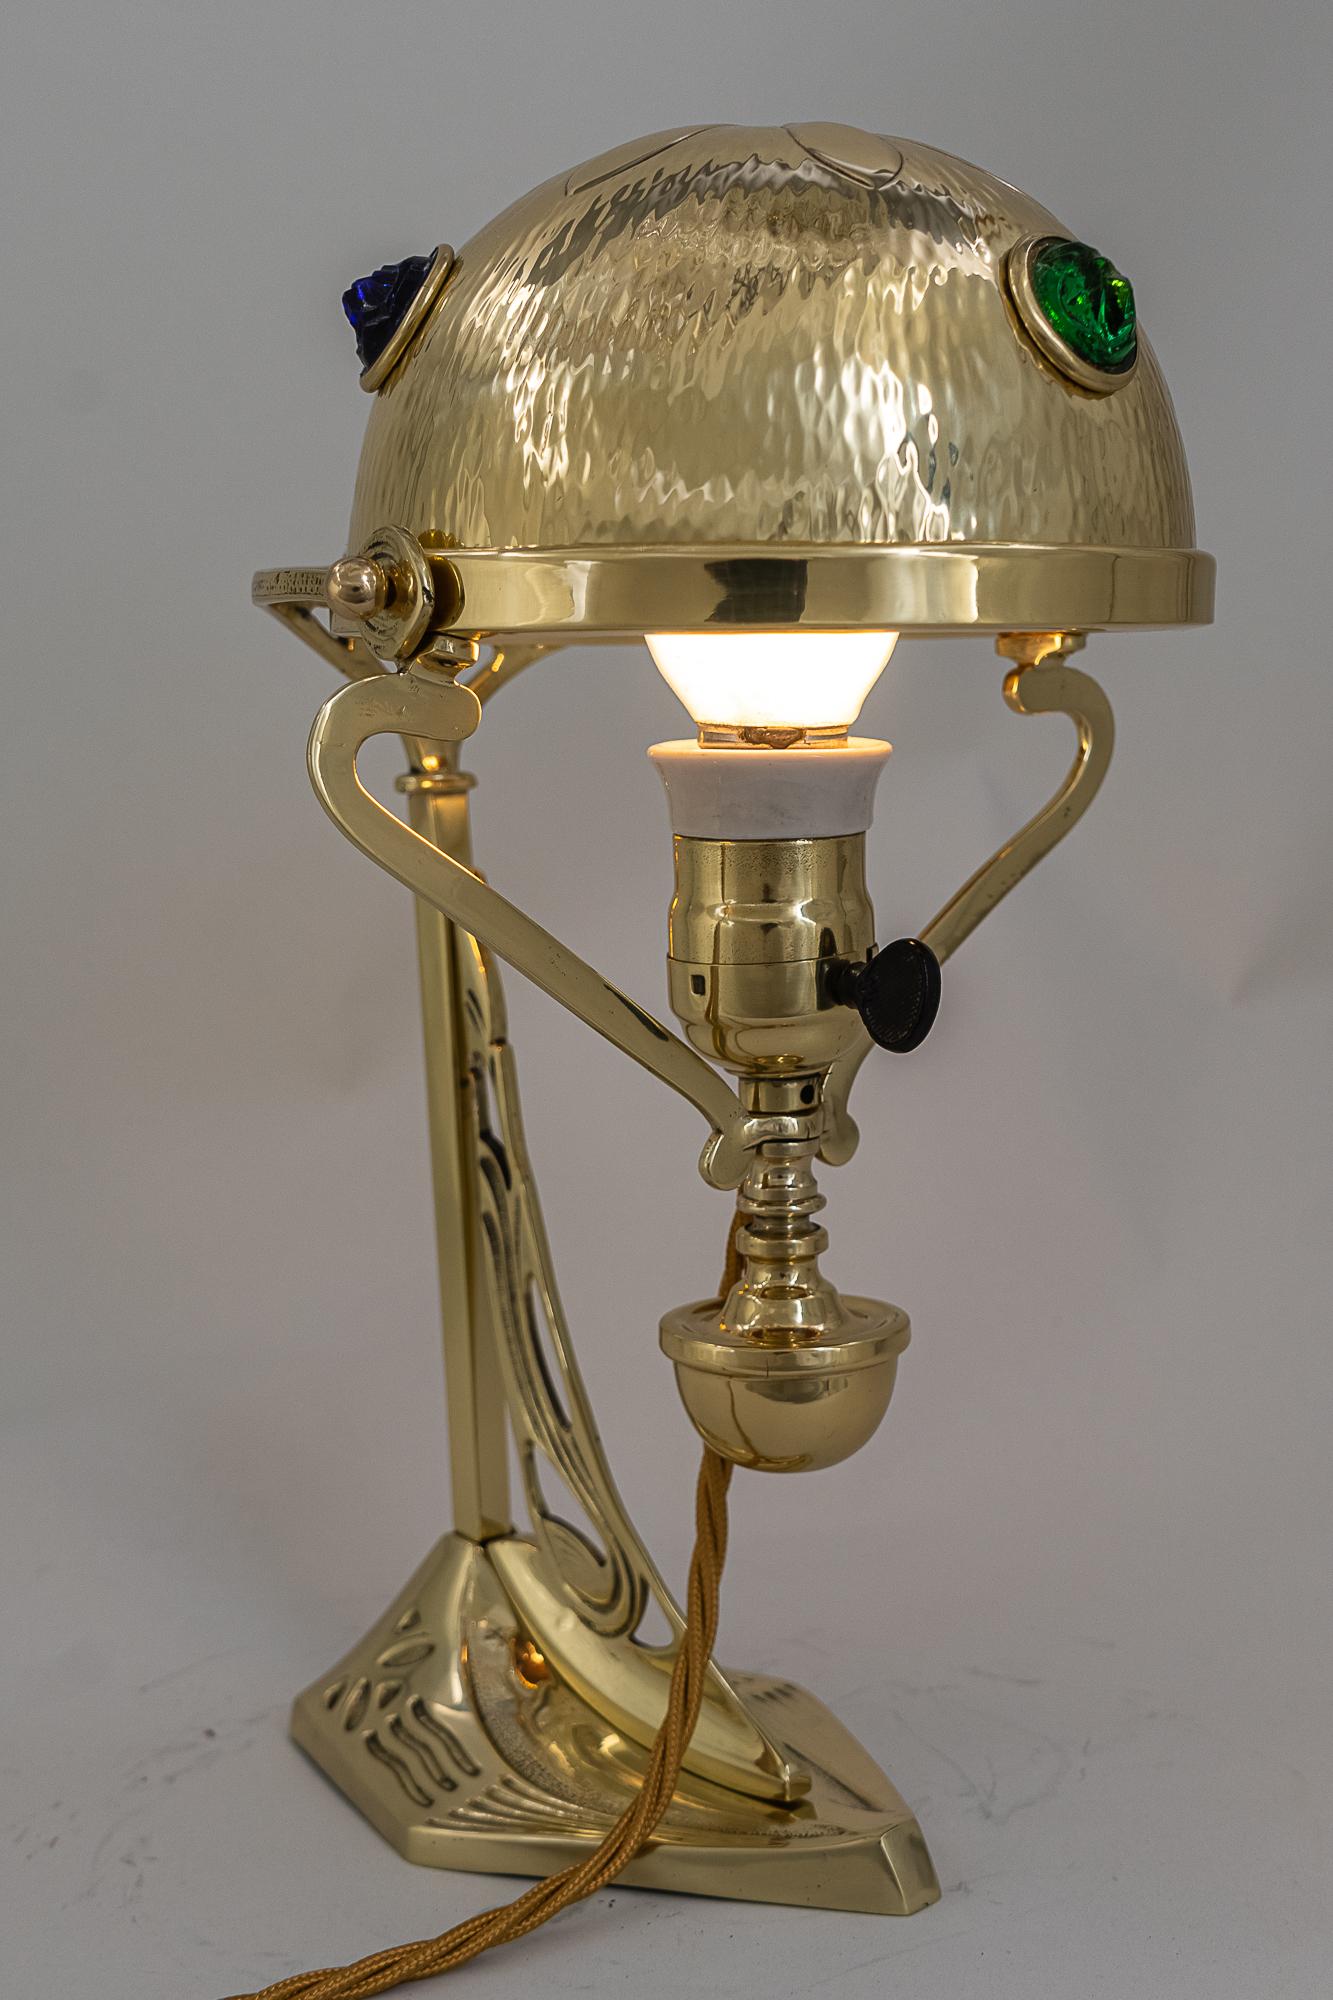 Early 20th Century Jugendstil Table Lamp, Vienna, circa 1909